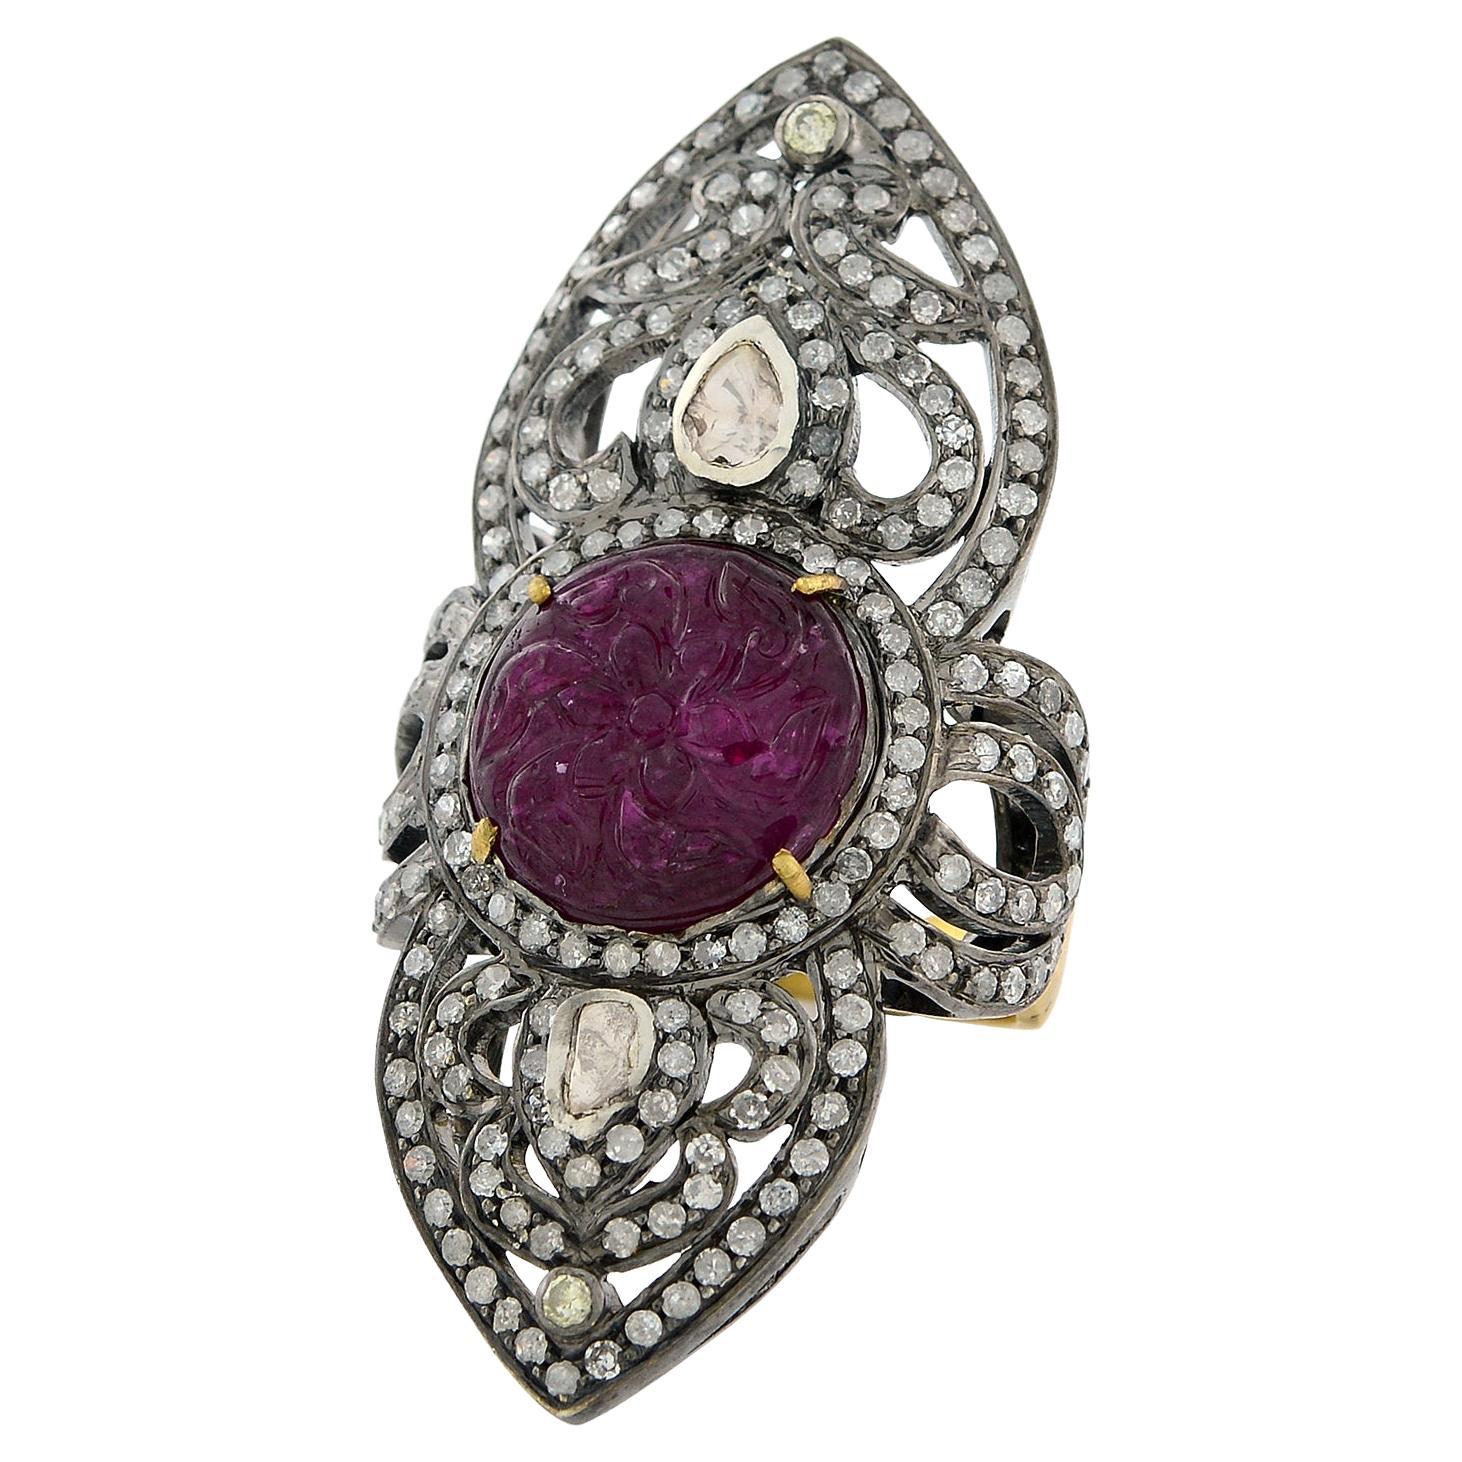 18k Gold & Silver Carved Ruby Knuckle Ring Adorned with Pave Diamonds